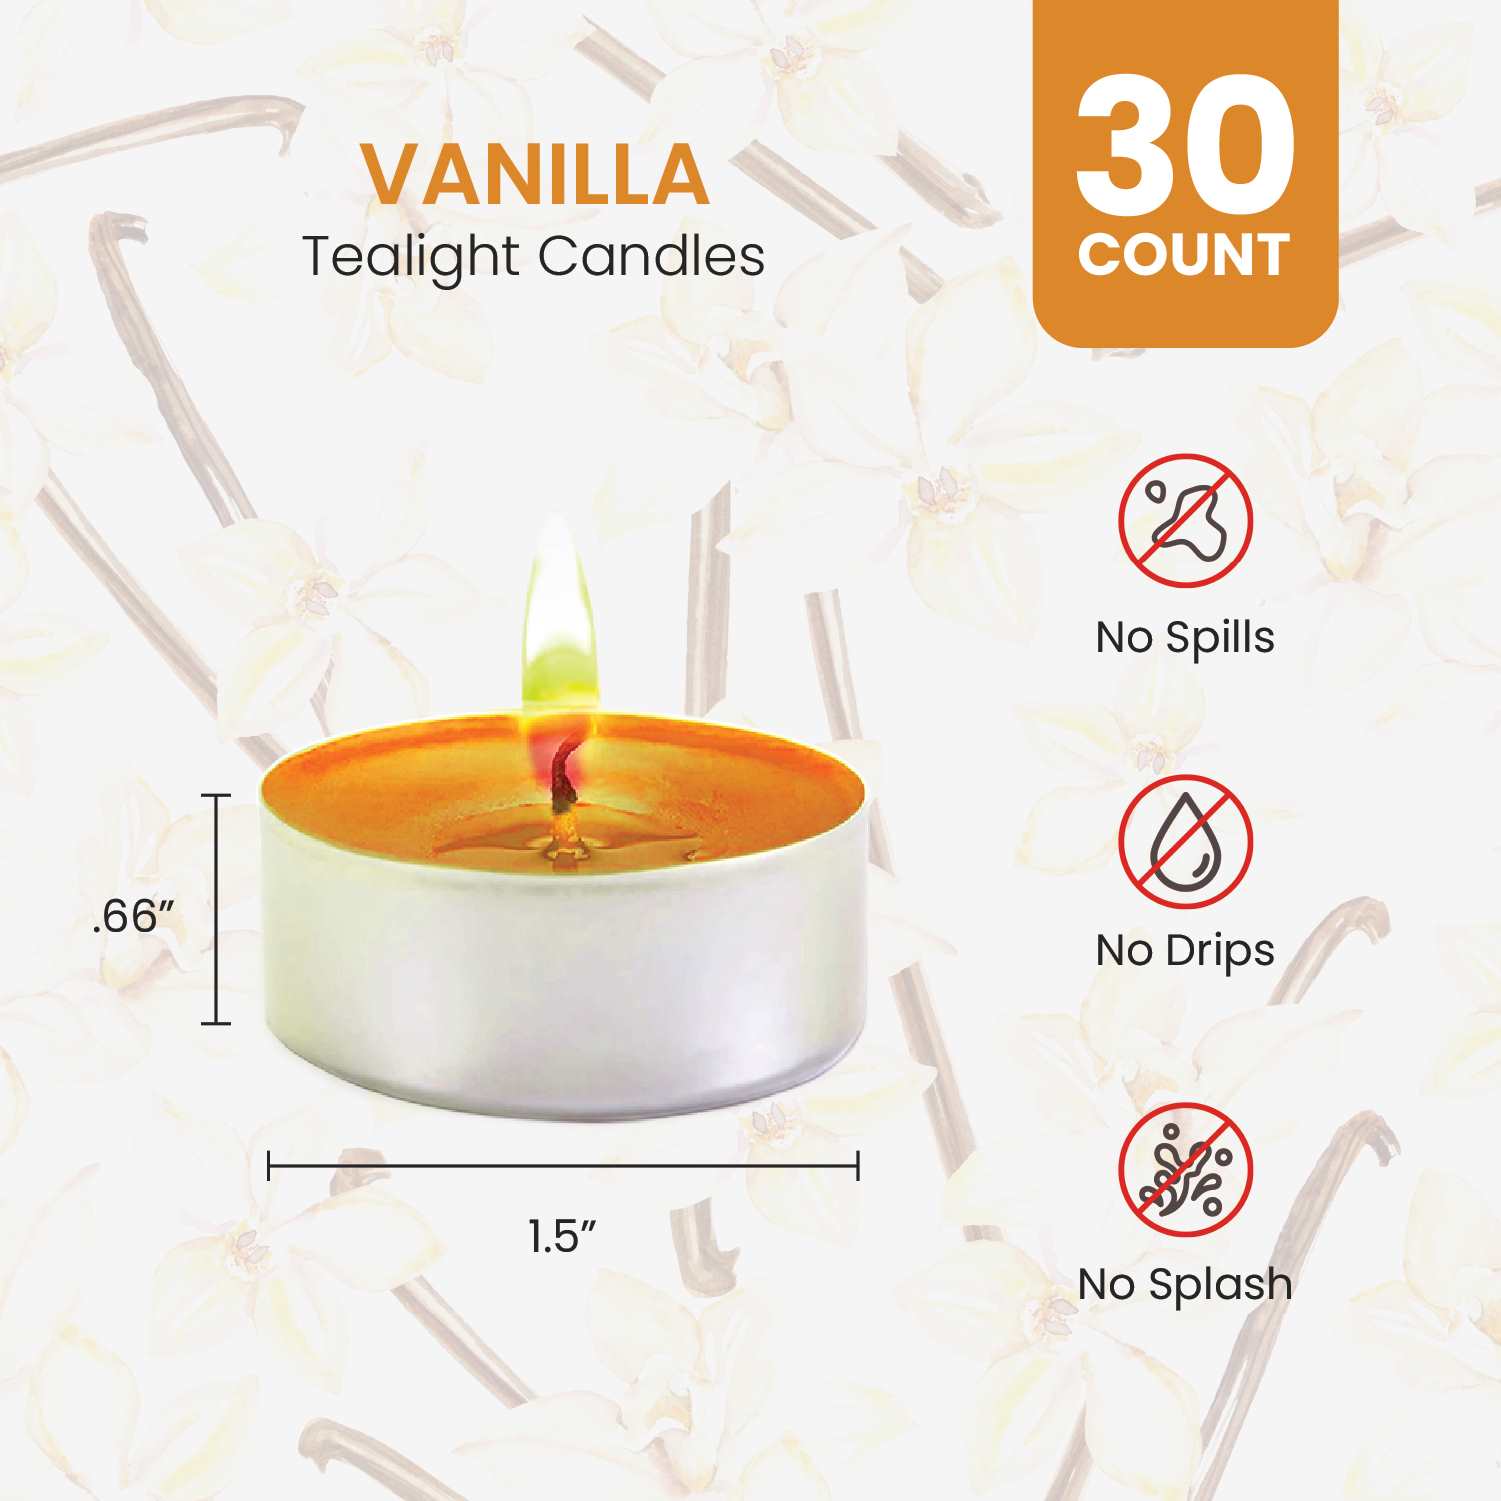 French Vanilla Scented Tealight Candles - 30 Pack